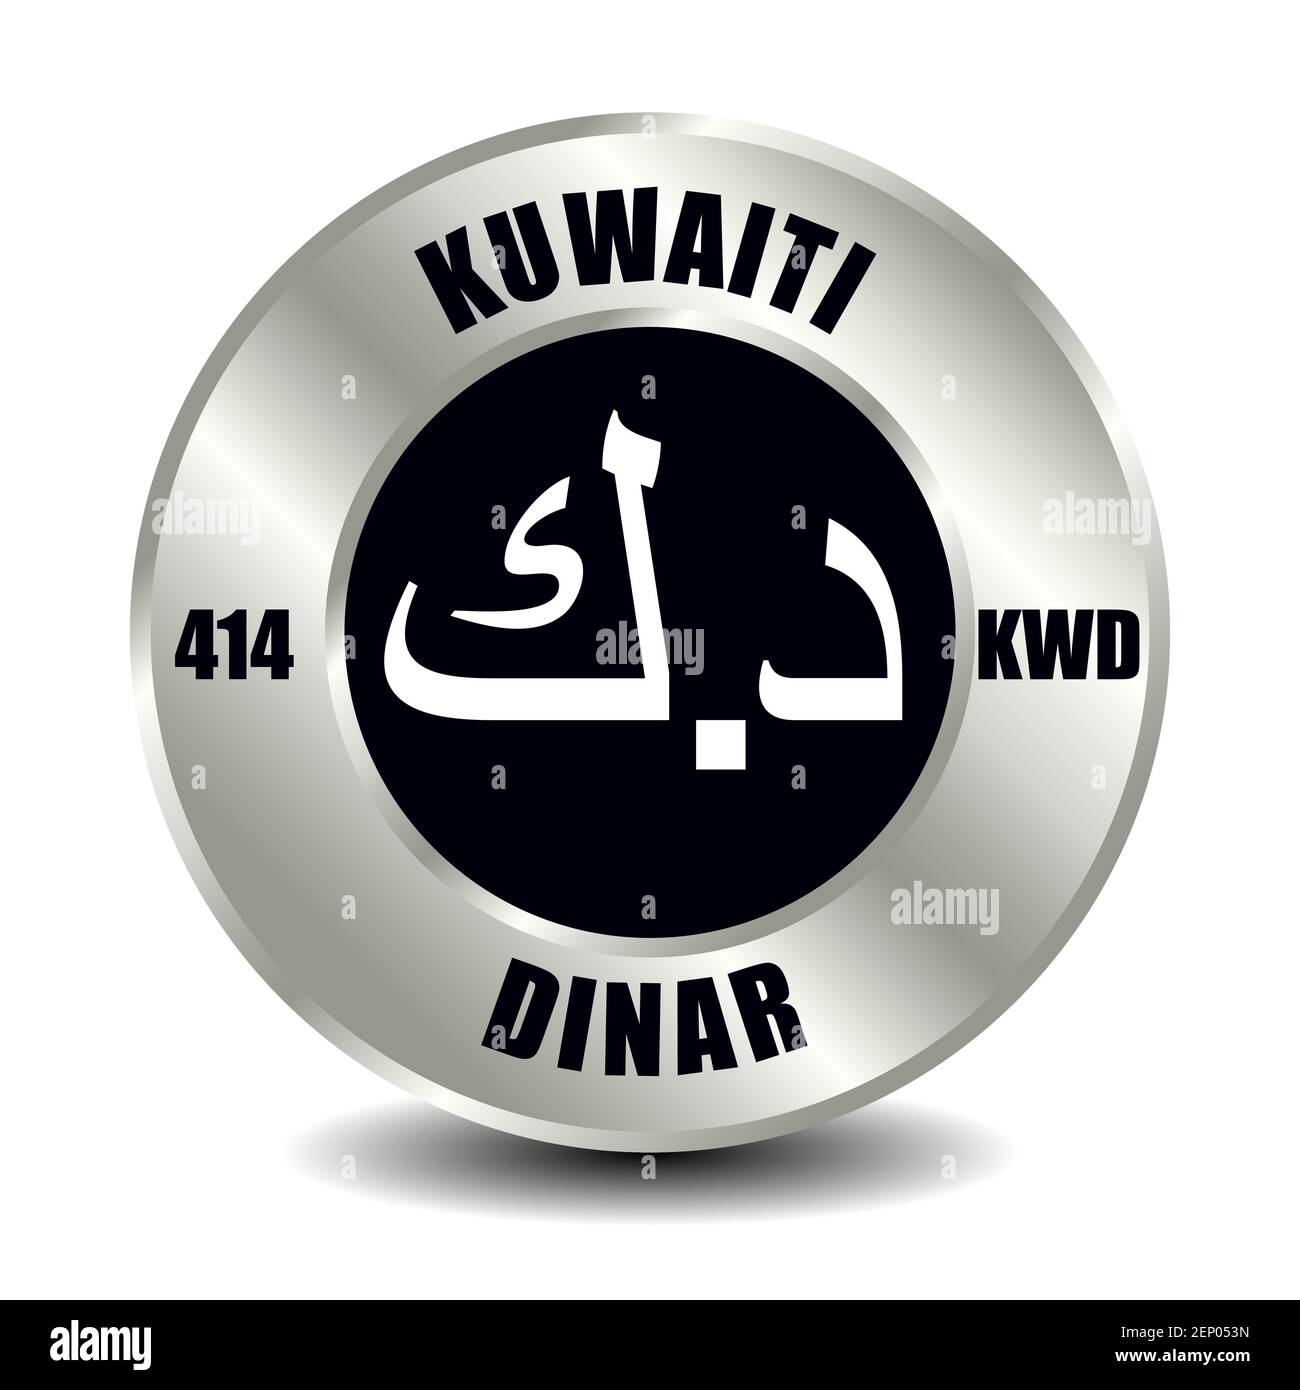 Kuwait money icon isolated on round silver coin. Vector sign of currency symbol with international ISO code and abbreviation Stock Vector